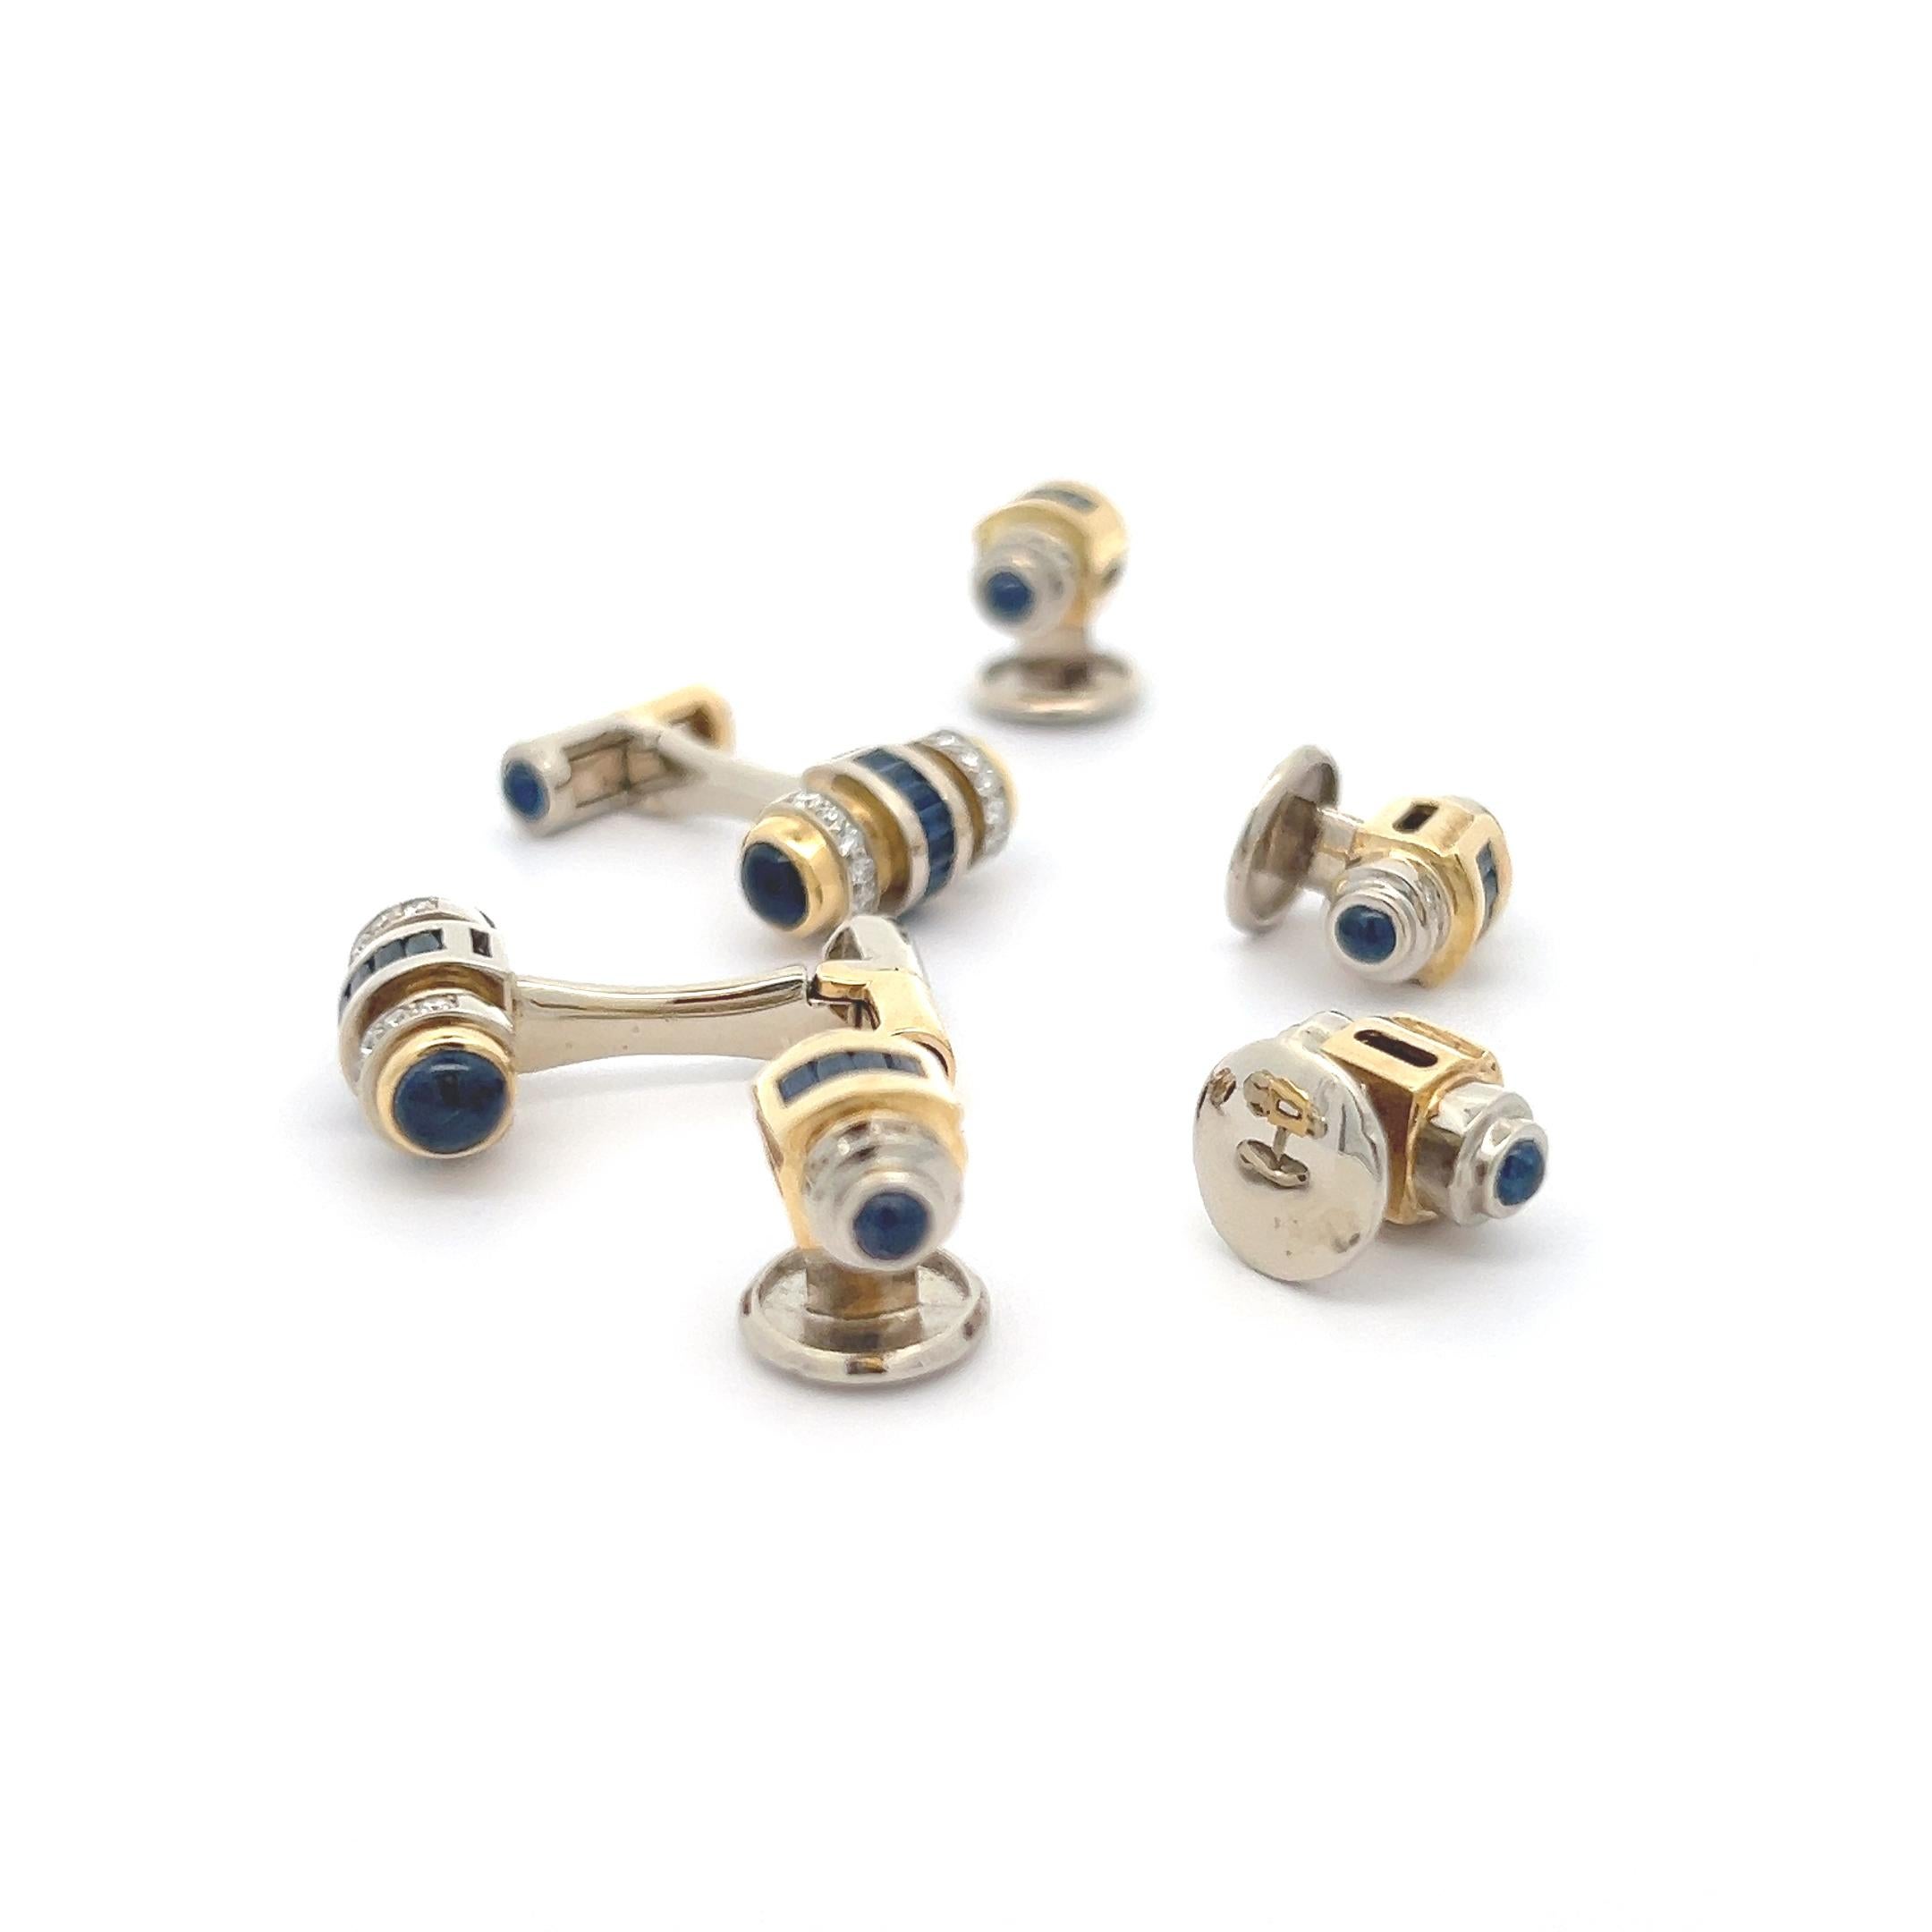 Stunning 18k yellow and white gold cufflinks and studs, meticulously crafted to perfection. At the heart of each piece lies a row of mesmerizing baguette blue sapphires, exuding a rich and captivating hue that commands attention with its timeless